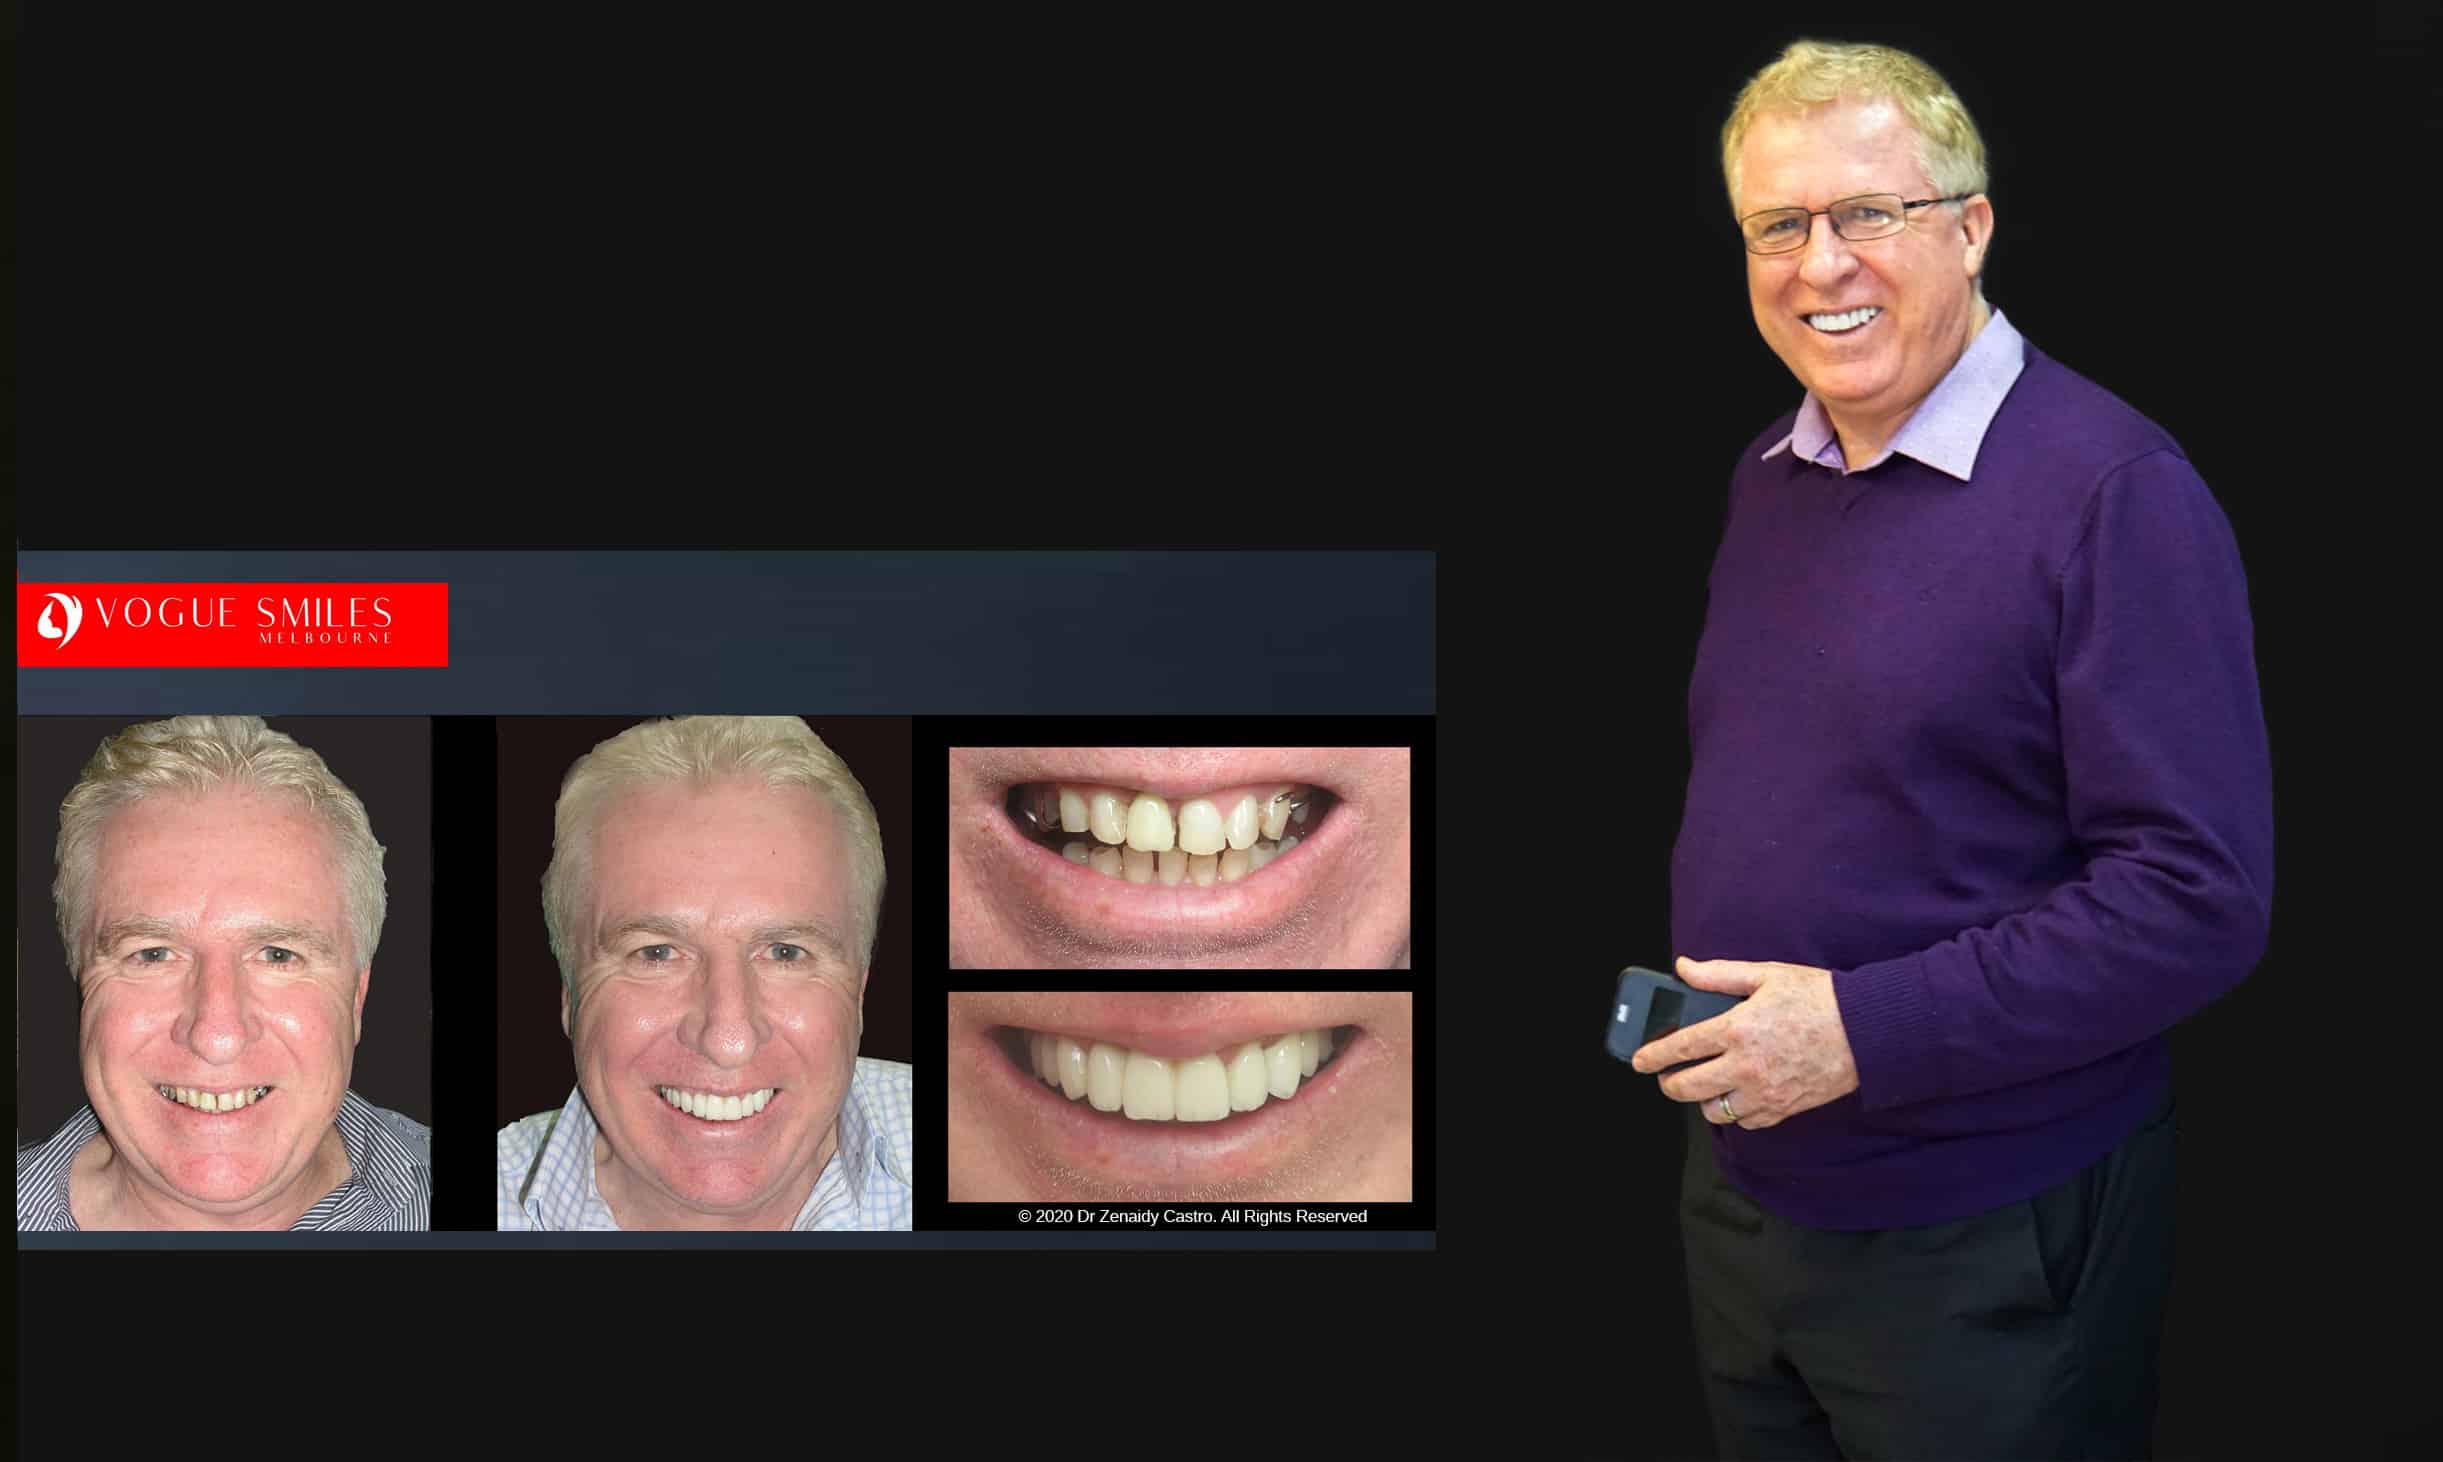 Before and After Smile Gallery | Australia's Top Cosmetic Dentistry | Vogue Smiles Melbourne -Best Cosmetic Dentist Melbourne CBD